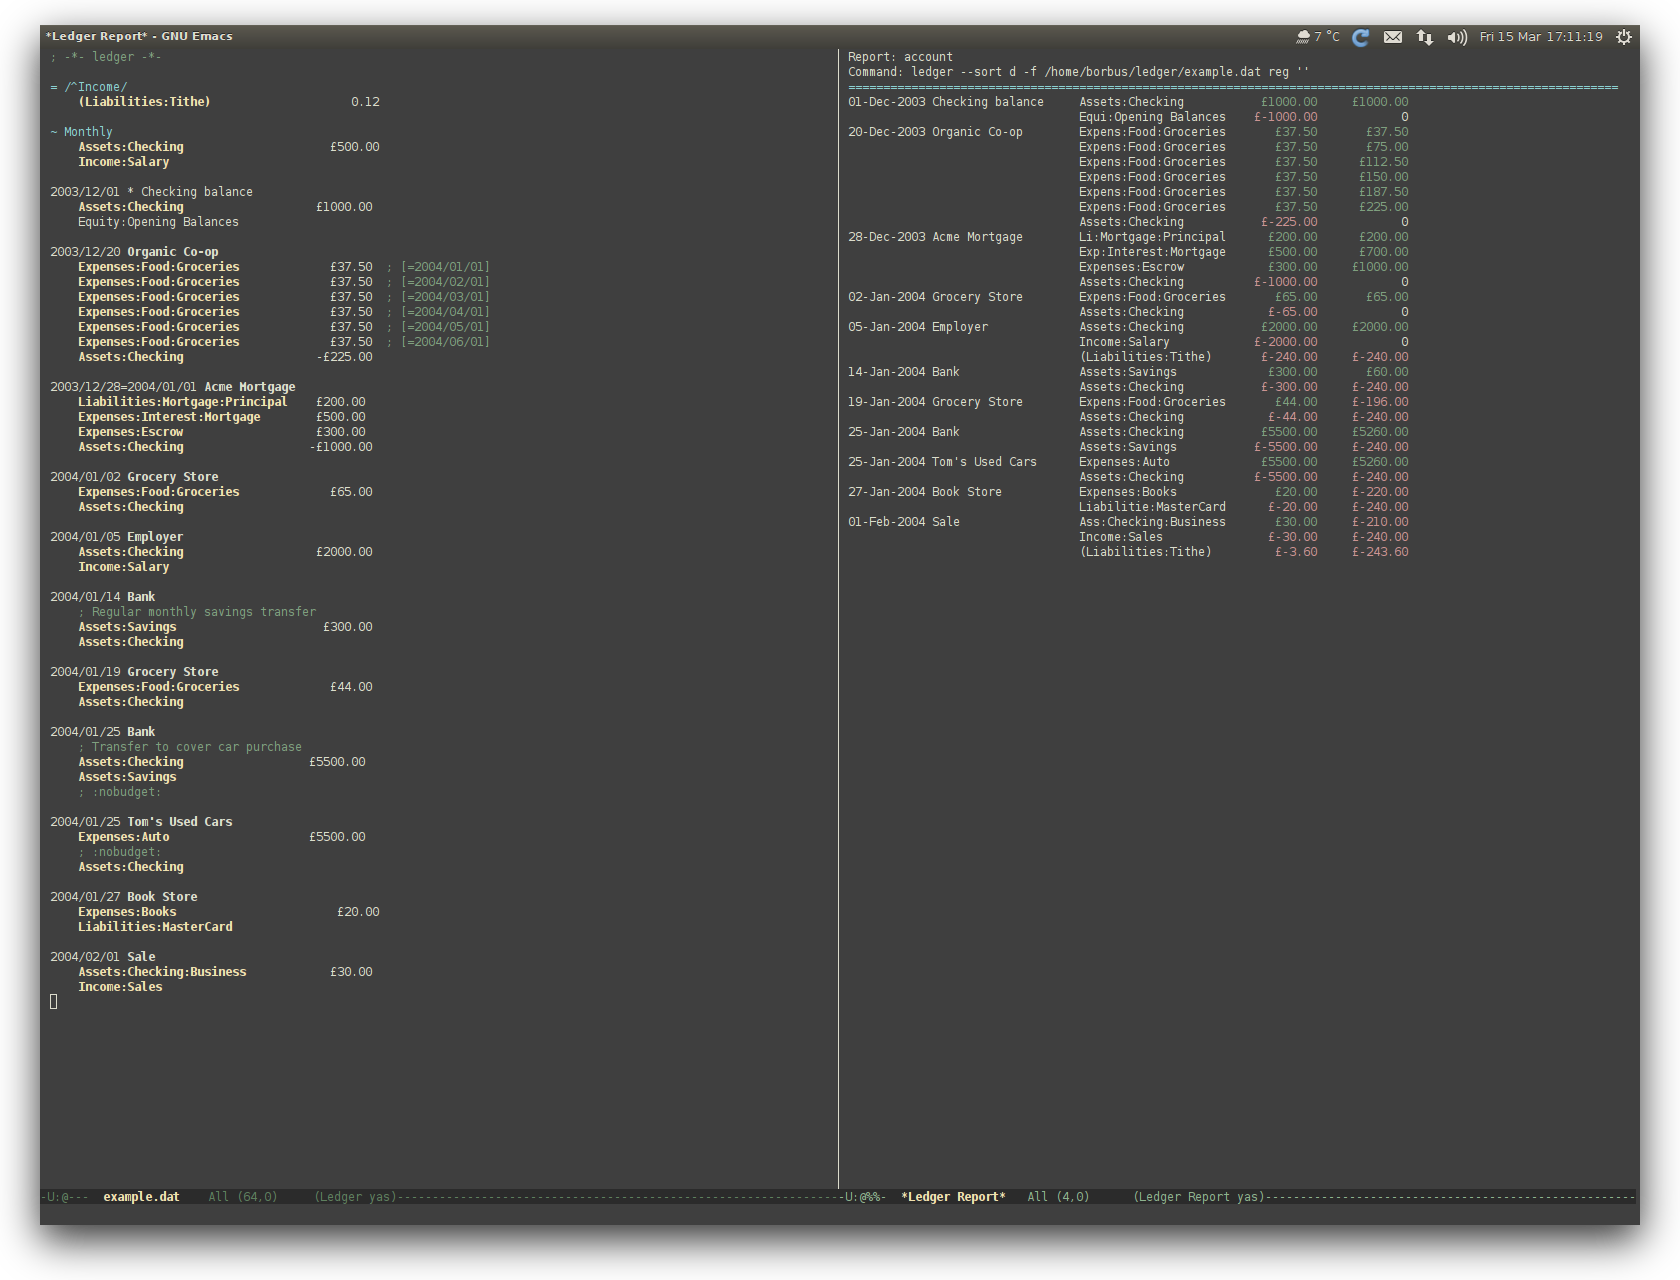 /TakeV/spacemacs/media/commit/dac0ba87a4e610d93a42422af612ae0f8ac33144/layers/finance/img/ledger.png